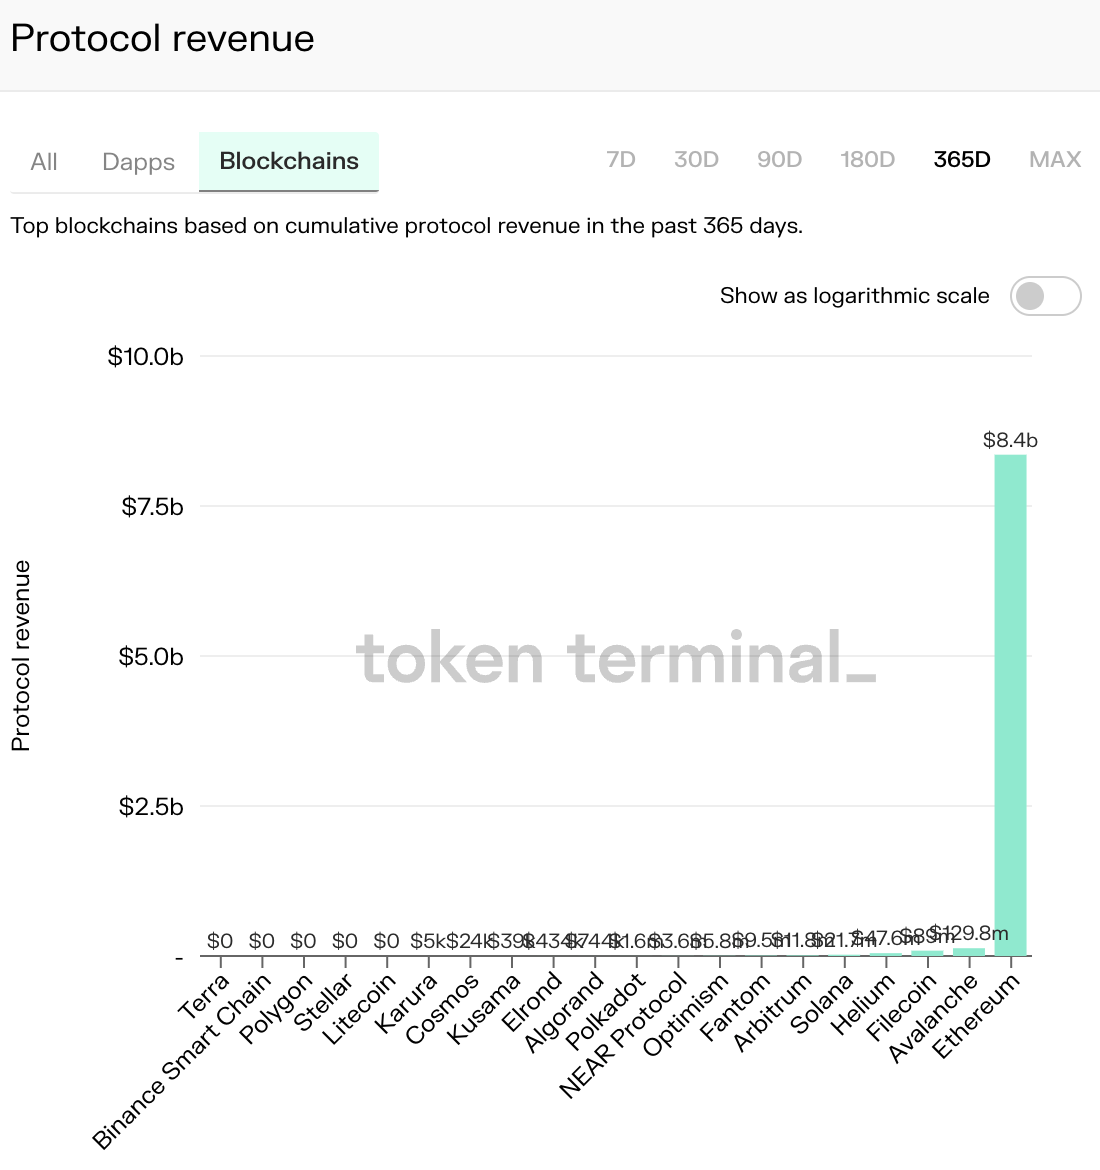 Token Terminal chart showing Ethereum's dominance of protocol revenue